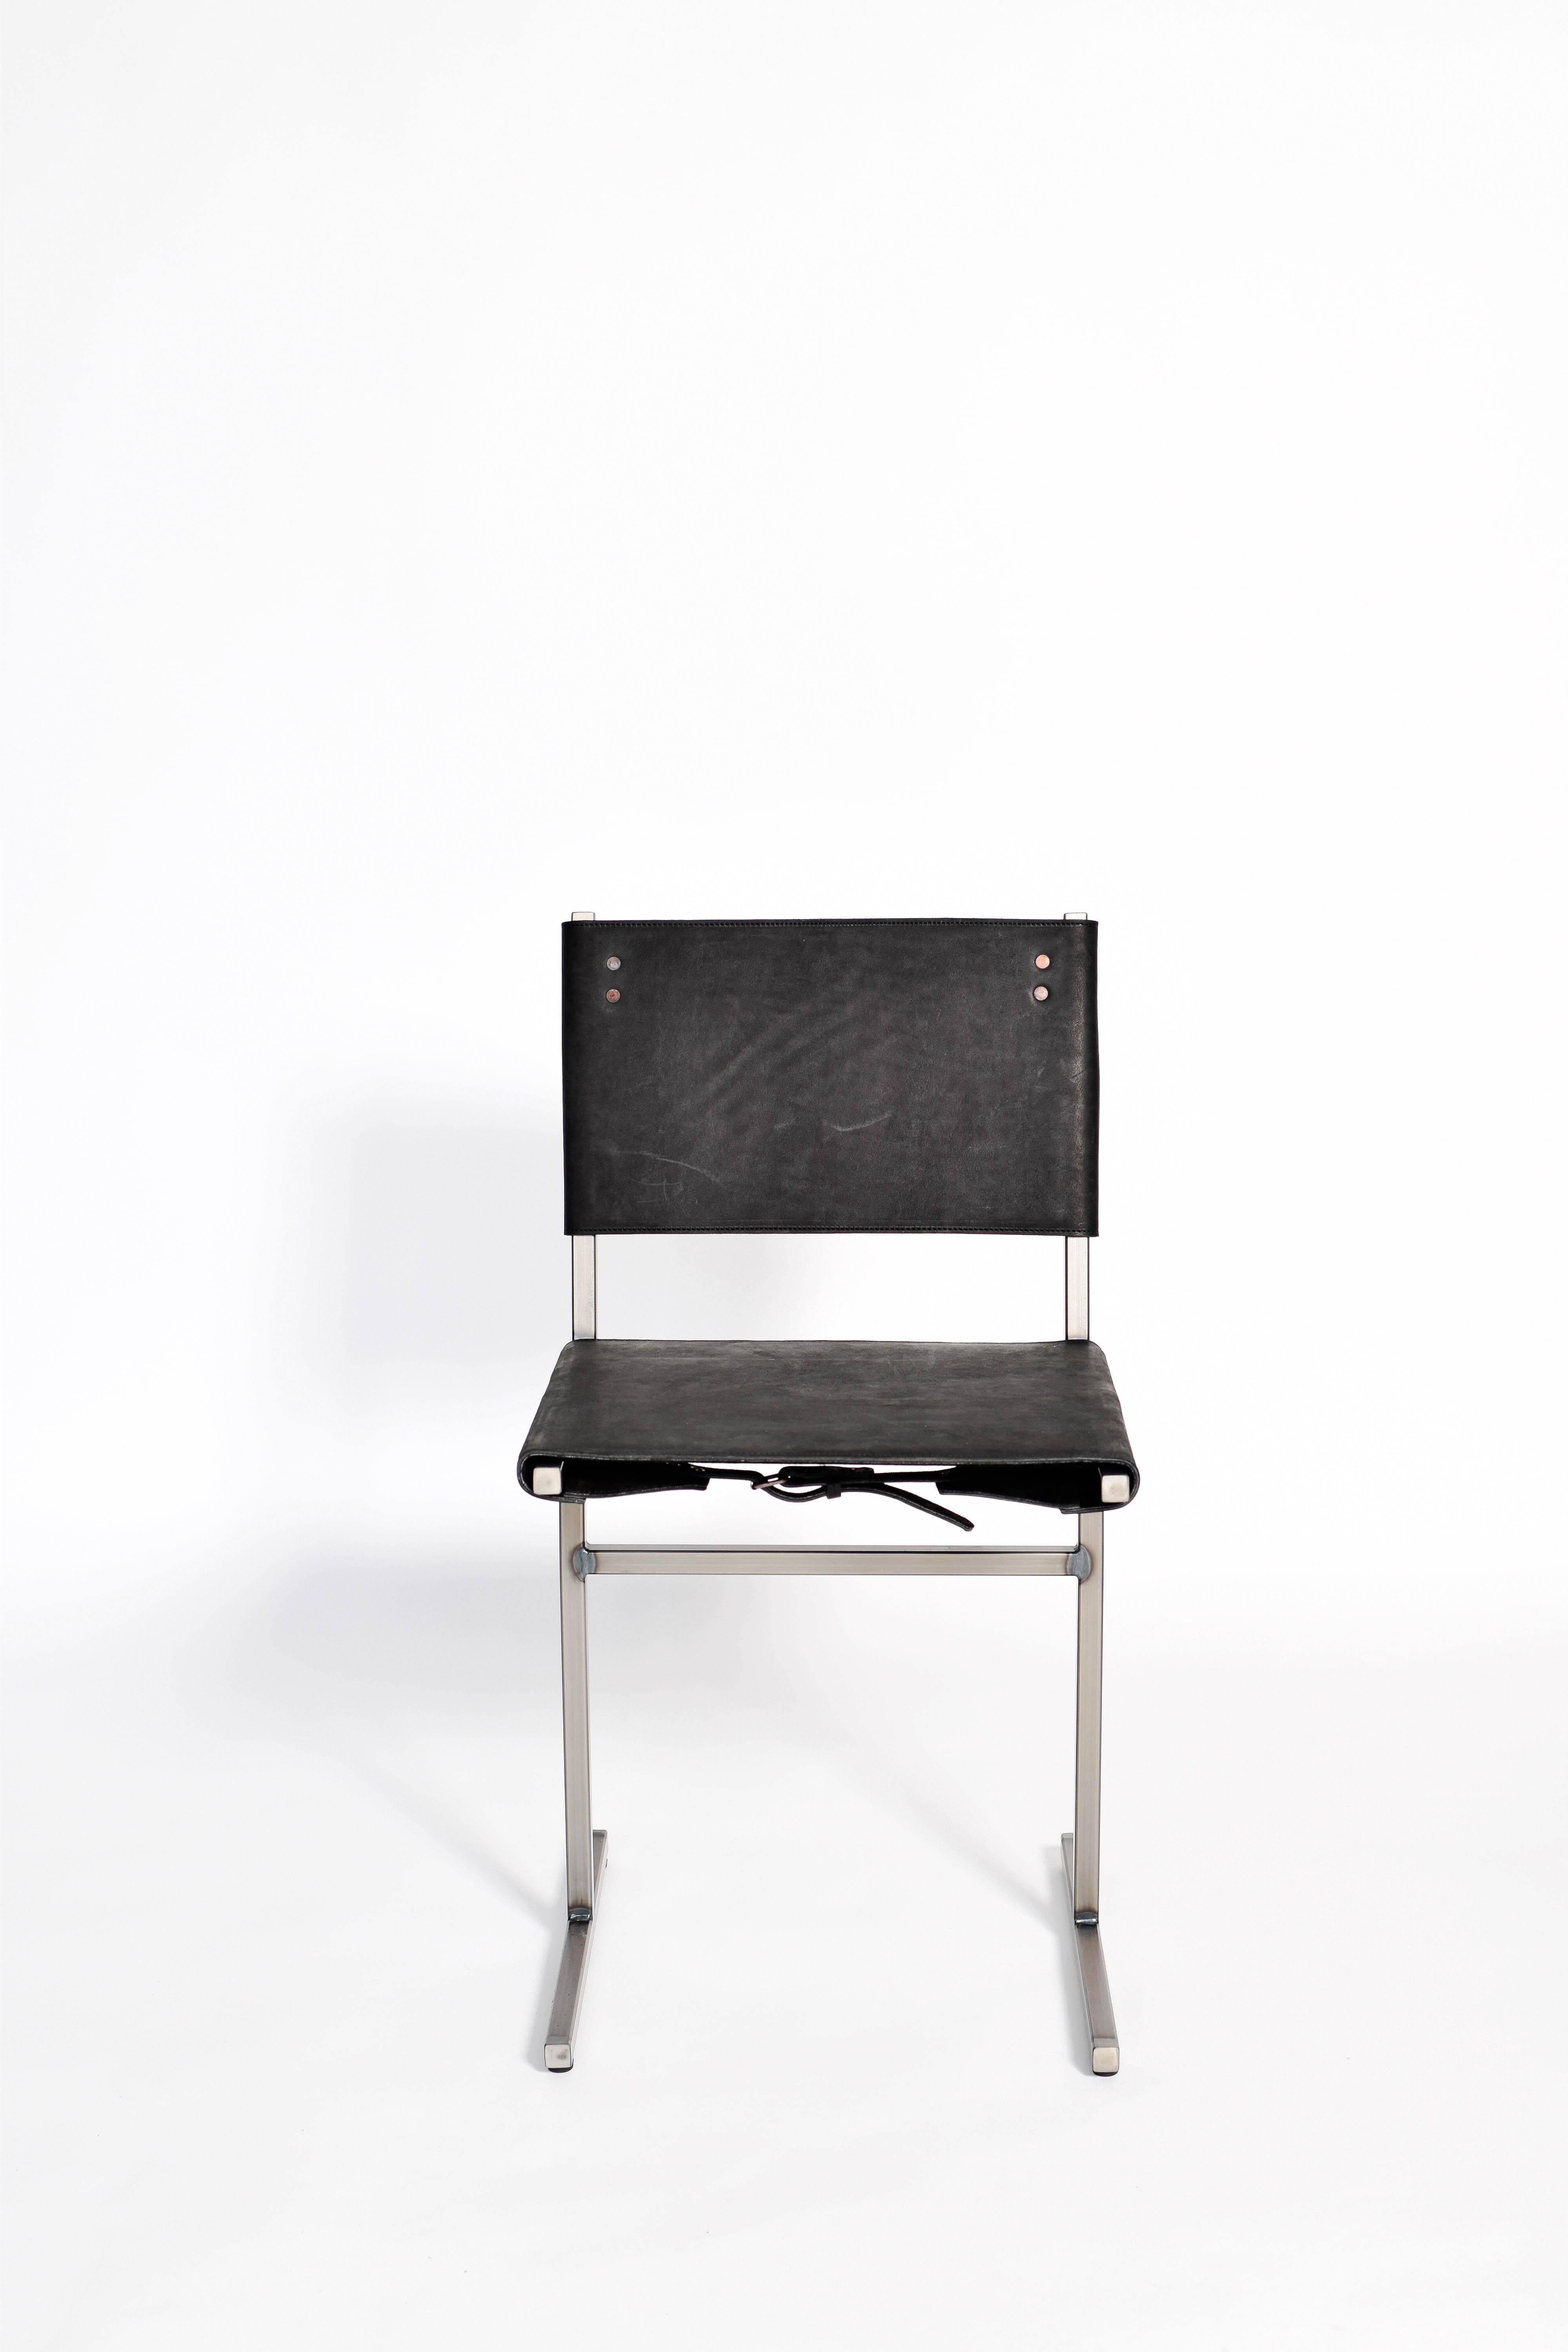 Black Memento chair, Jesse Sanderson
Original signed chair by Jesse Sanderson
Materials: Leather, steel
Dimensions: W 43 x D 50 x H 80 cm 
 Seating height: 47 cm

Frame finishes available in brass, bare steel, matt black.

Five lines and a